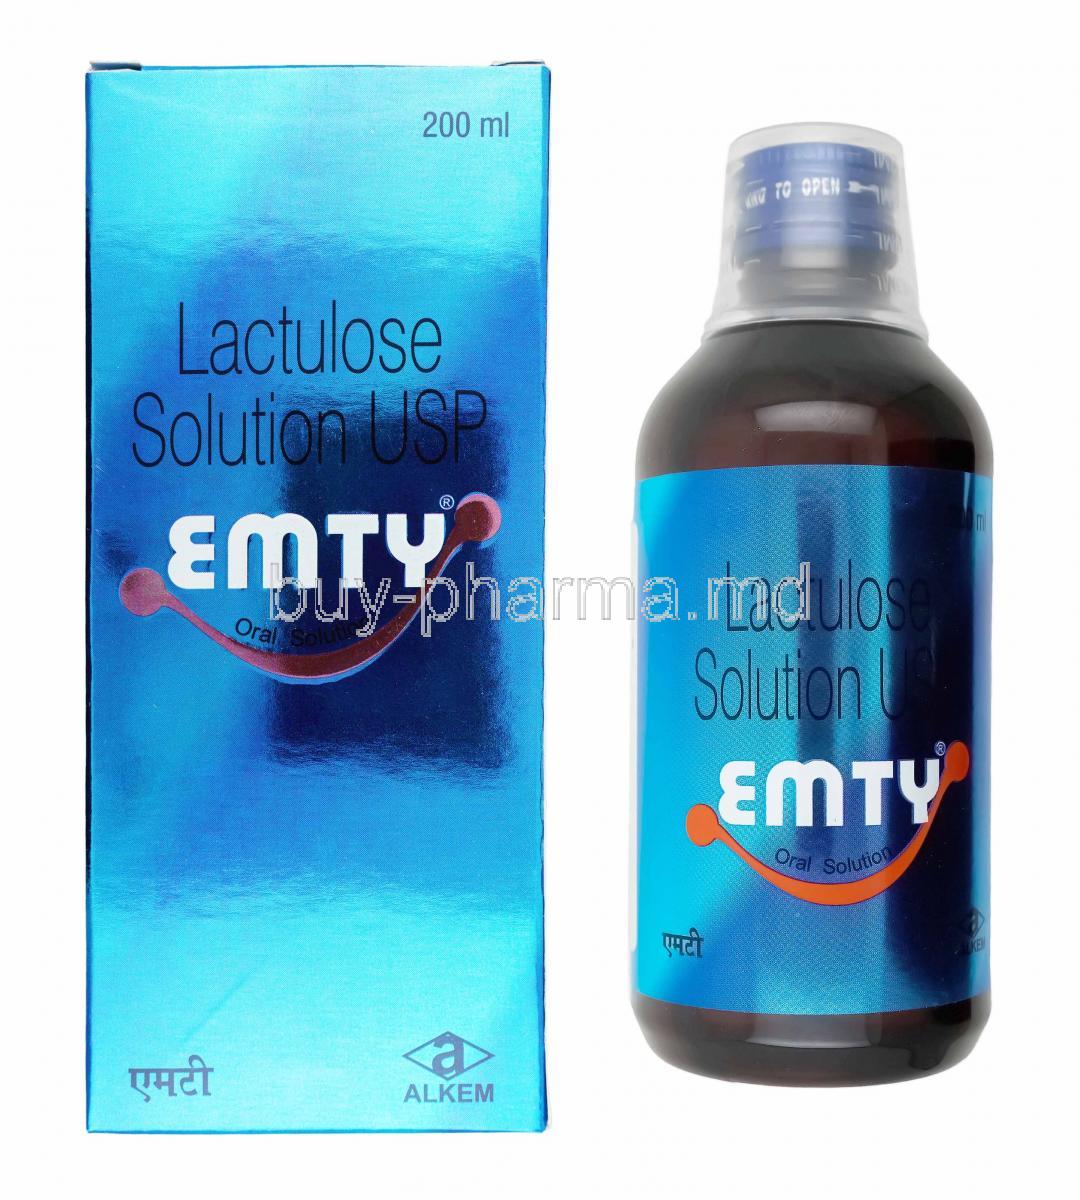 Emty Oral Solution, Lactulose 200ml box and bottle